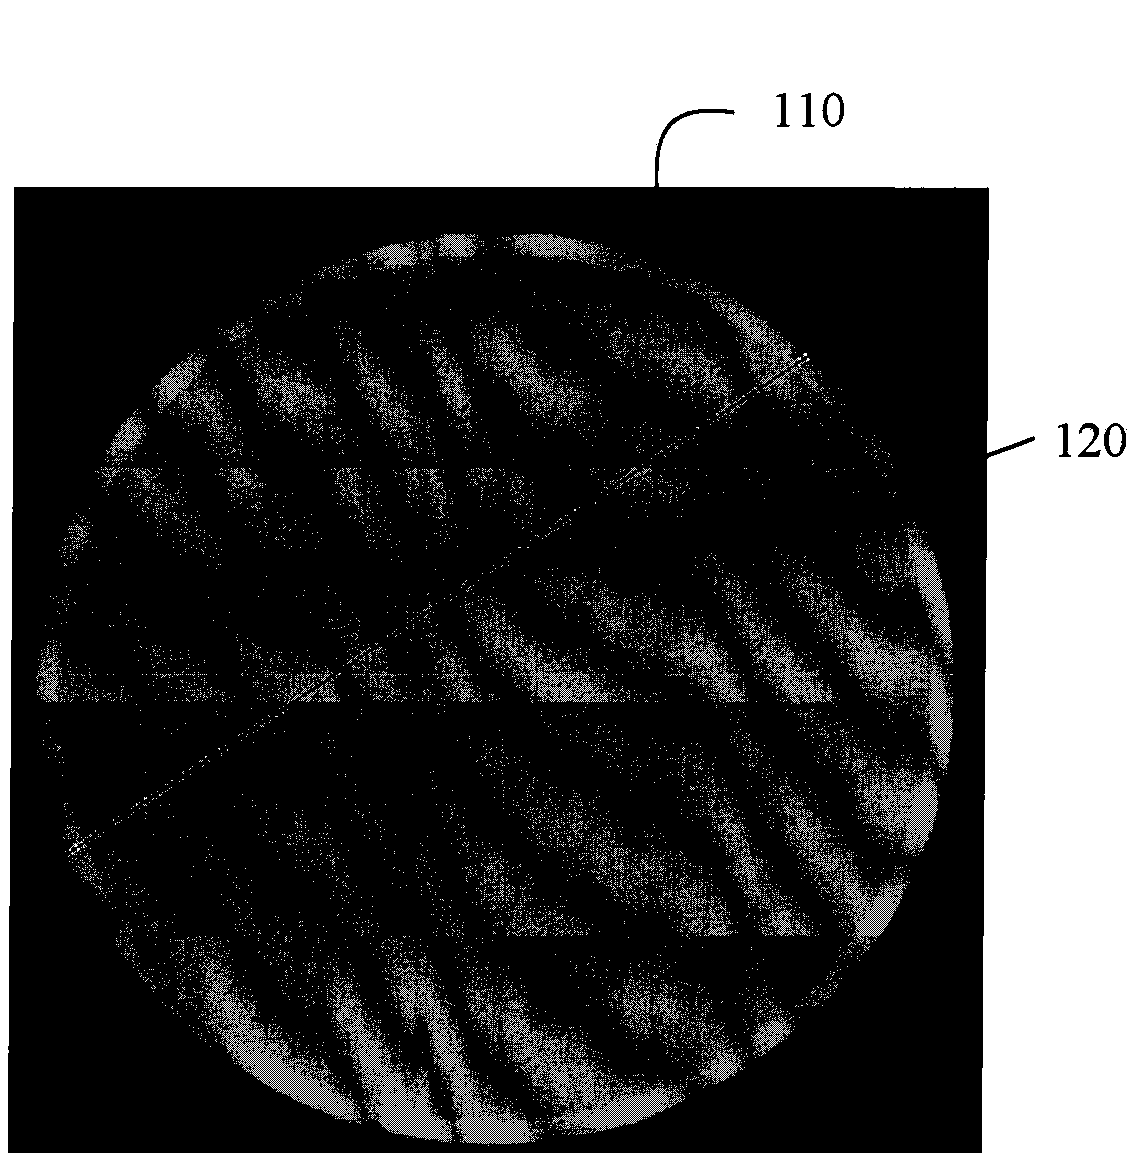 Computed tomography (CT) and method for determining unstable channel in detector